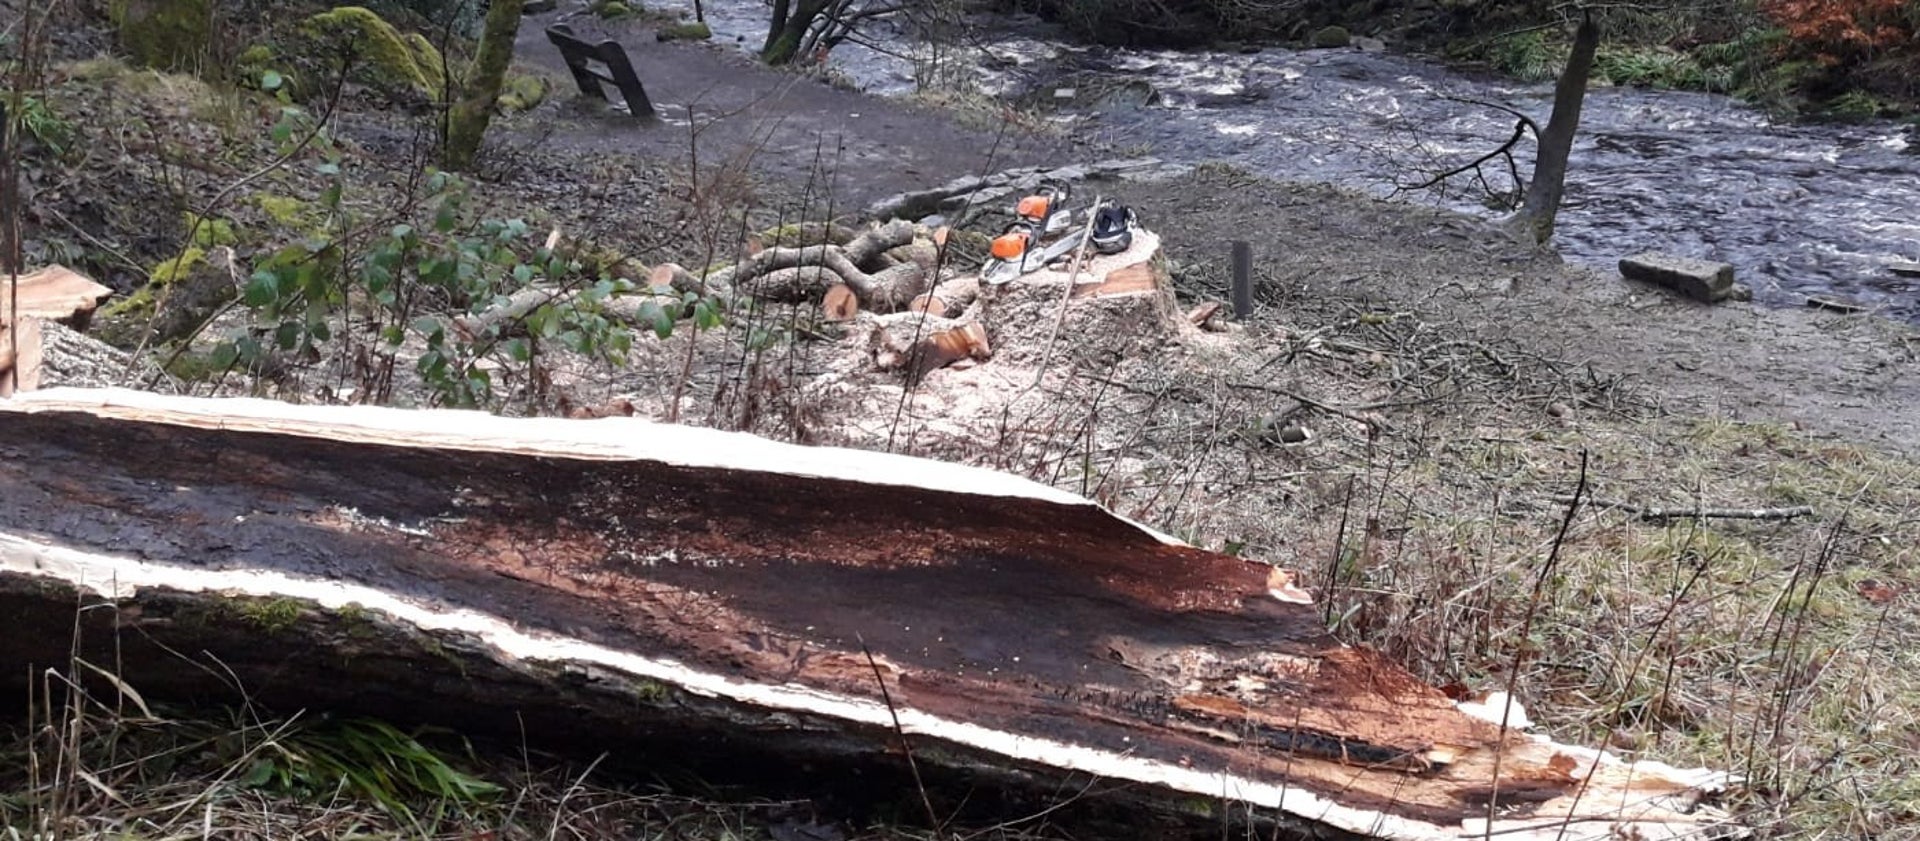 british trees under threat - ash dieback felling hollow damaged tree at hardcastle crags west yorkshire